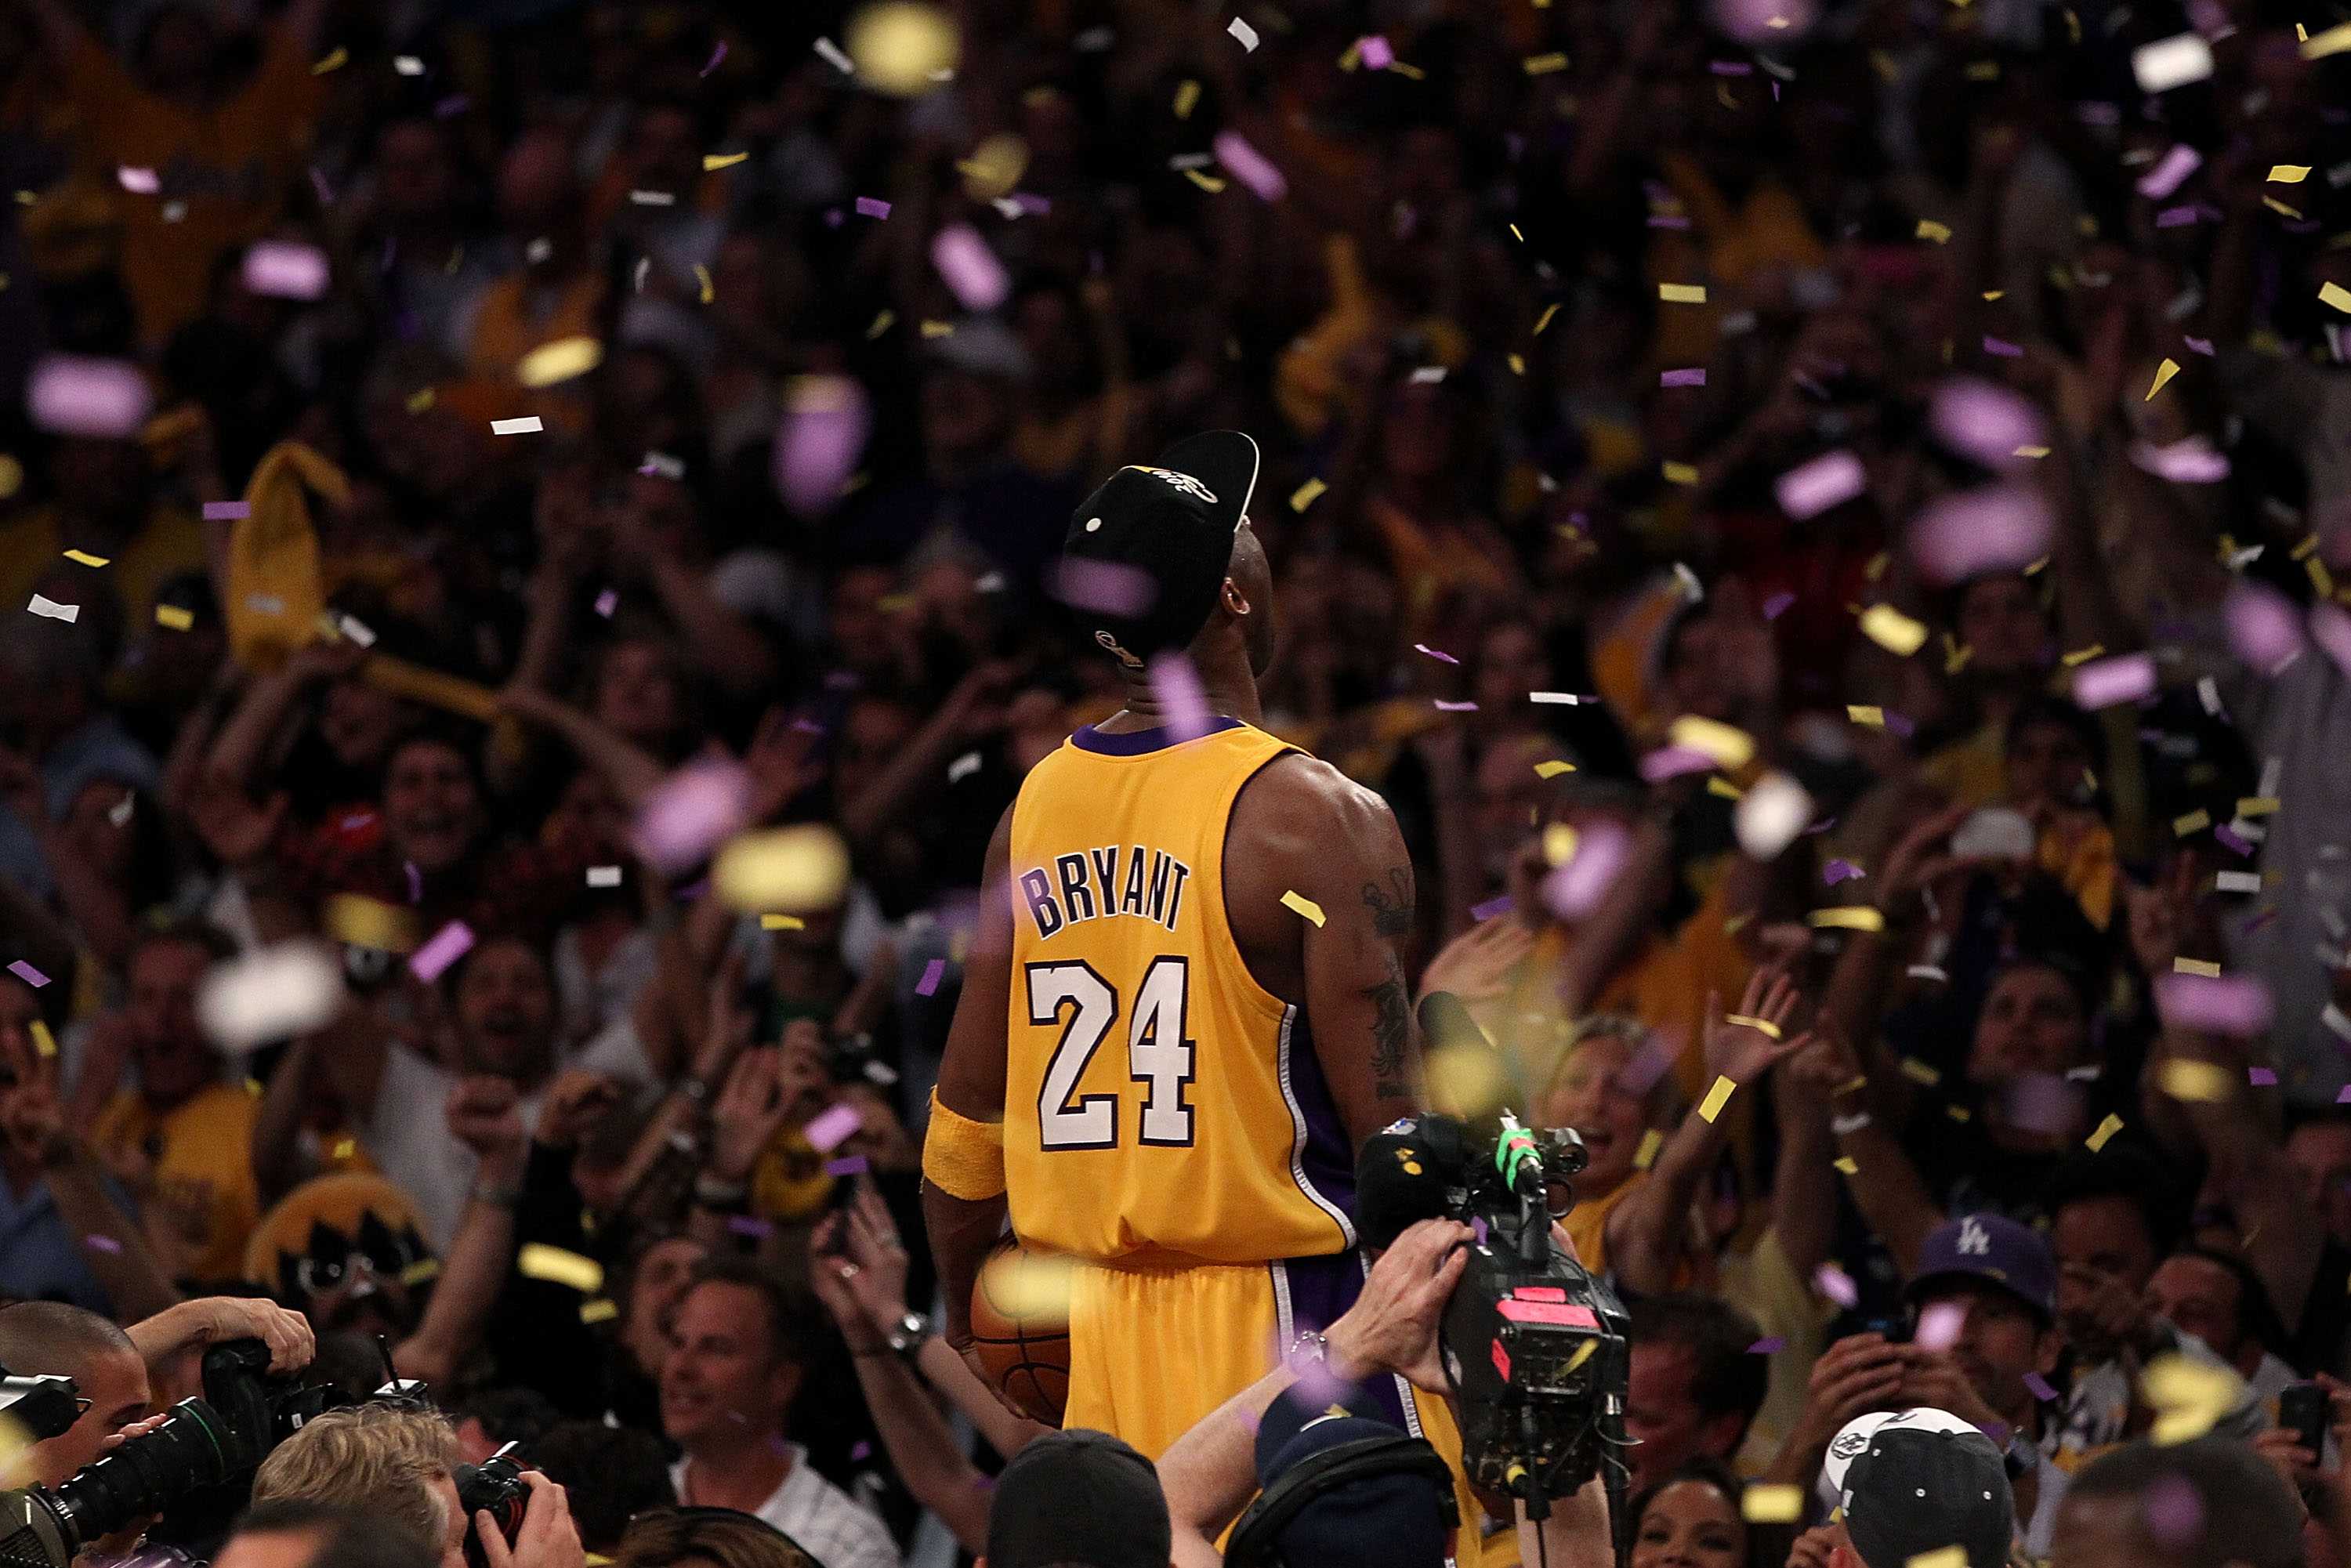 Kobe Bryant dead, NBA news: Kobe jersey retire, number change; Why did Kobe  Bryant have two jersey numbers; Why did Kobe change his jersey to 24